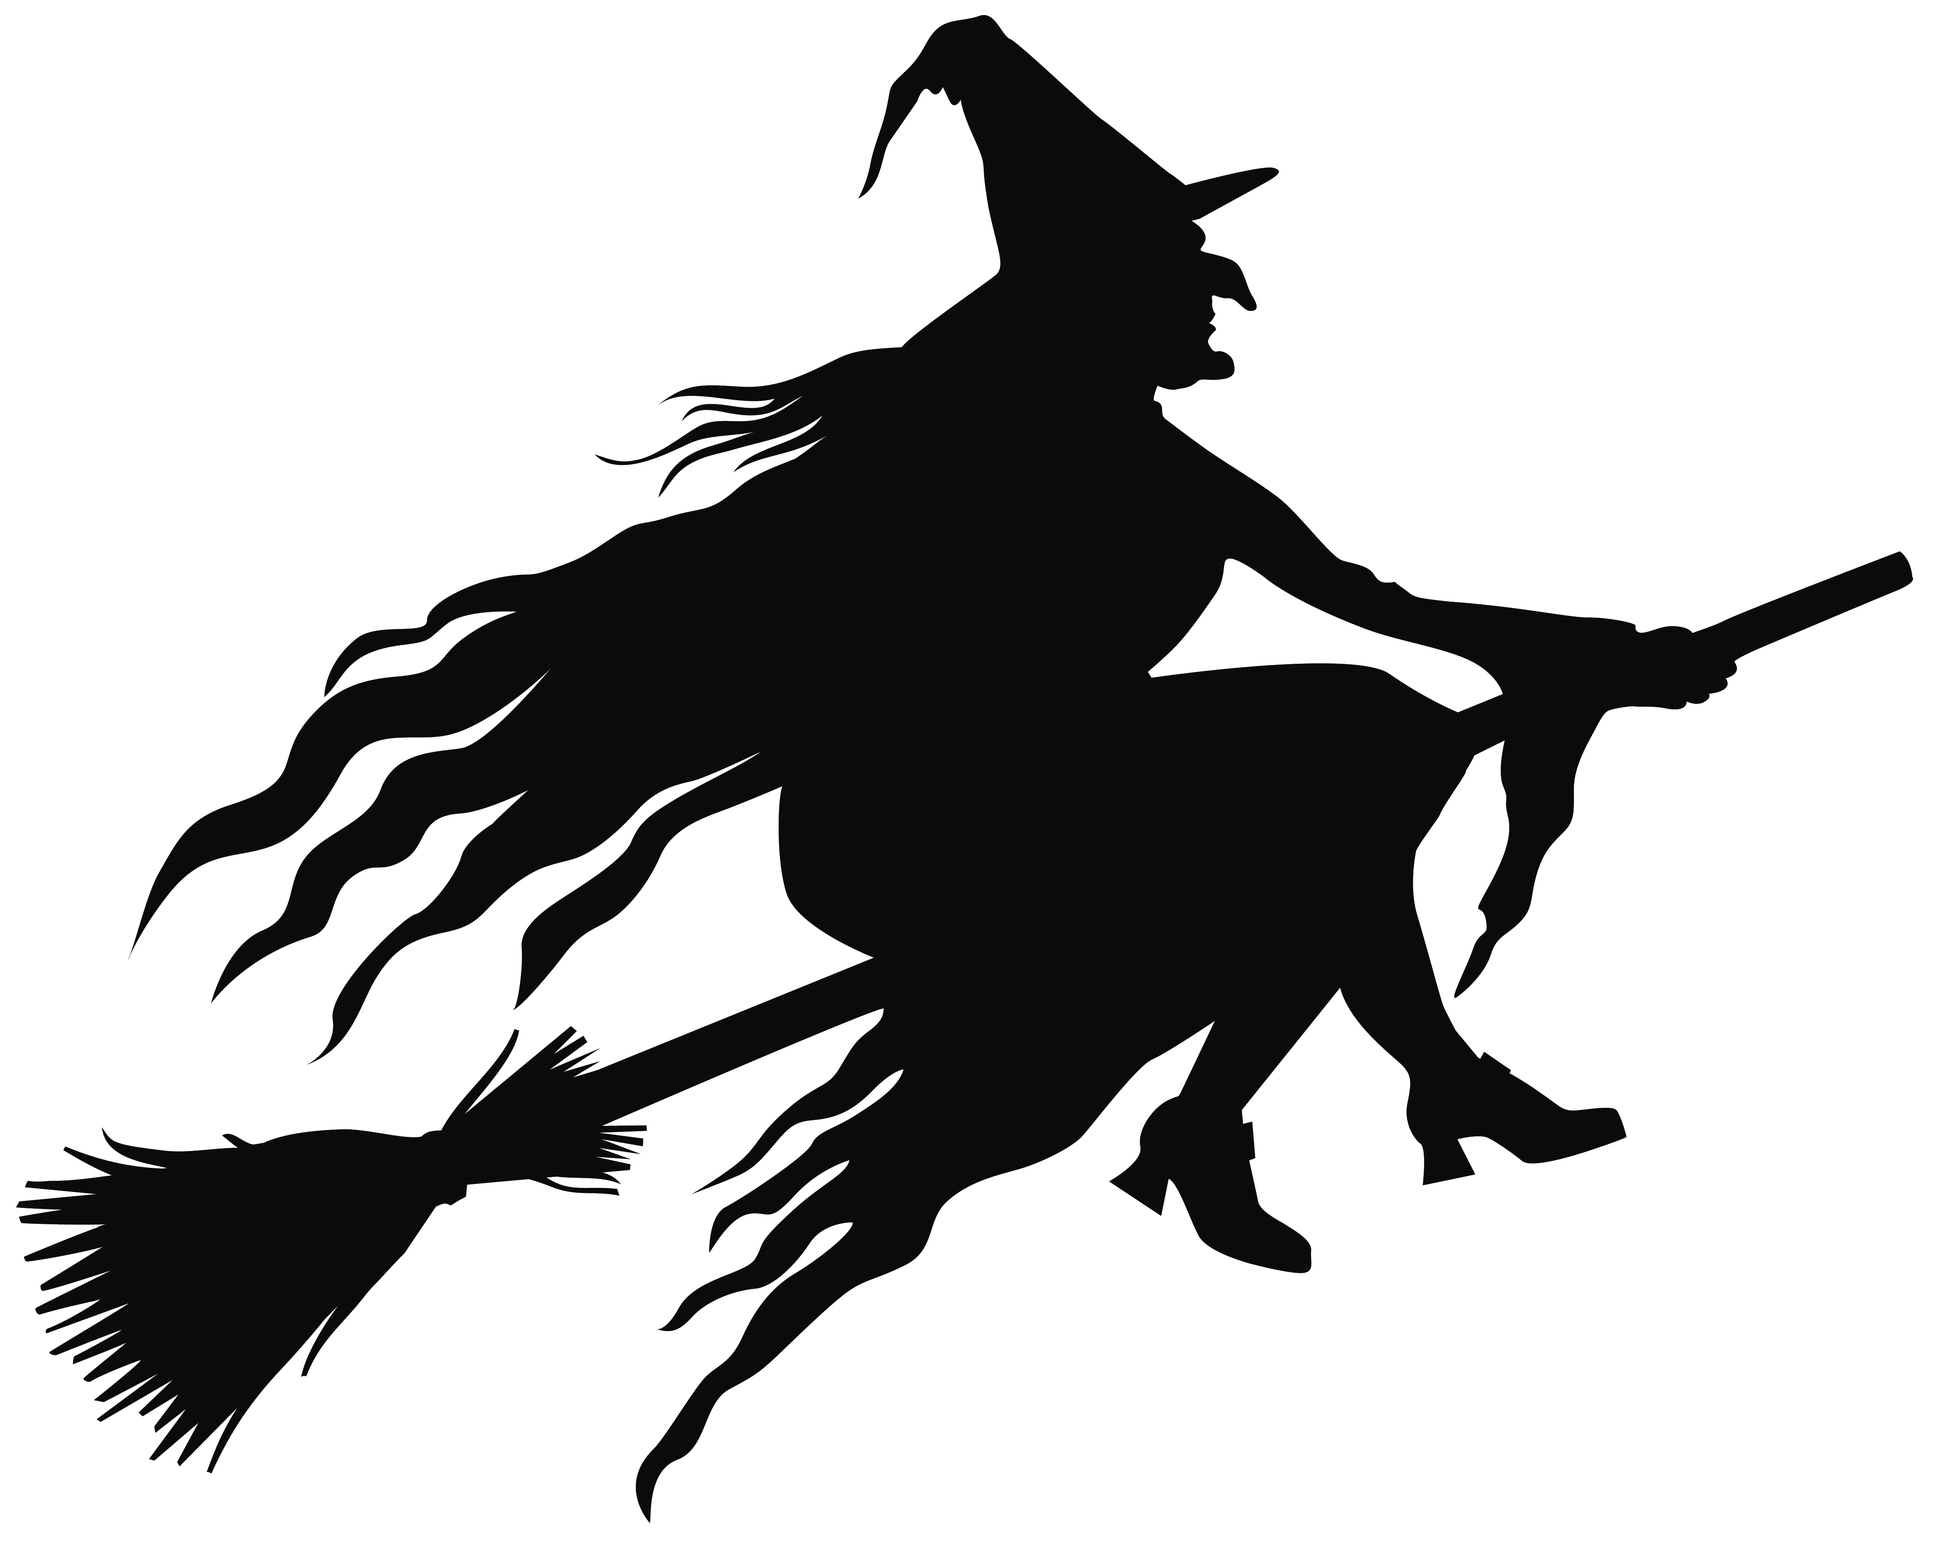 Modern Witches Deal With Common Stereotypes - ULC Blog - Universal Life ...